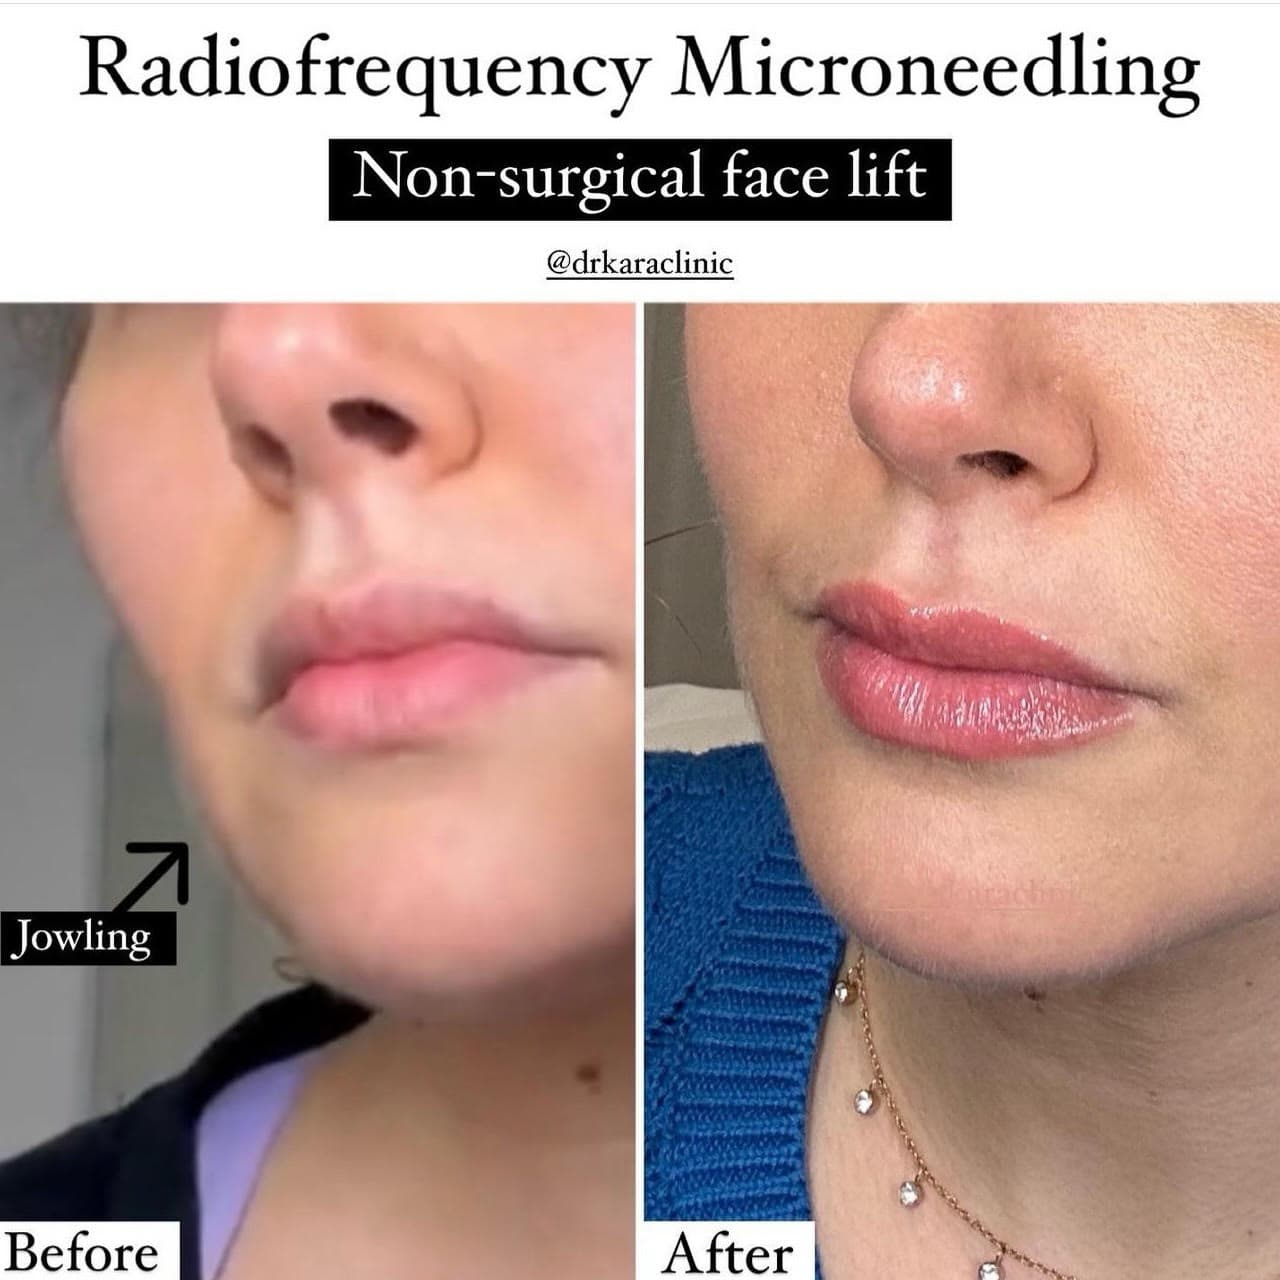 Radiofrequency microneedling face jowling result in Norwich,Norfolk, UK by PureDerma